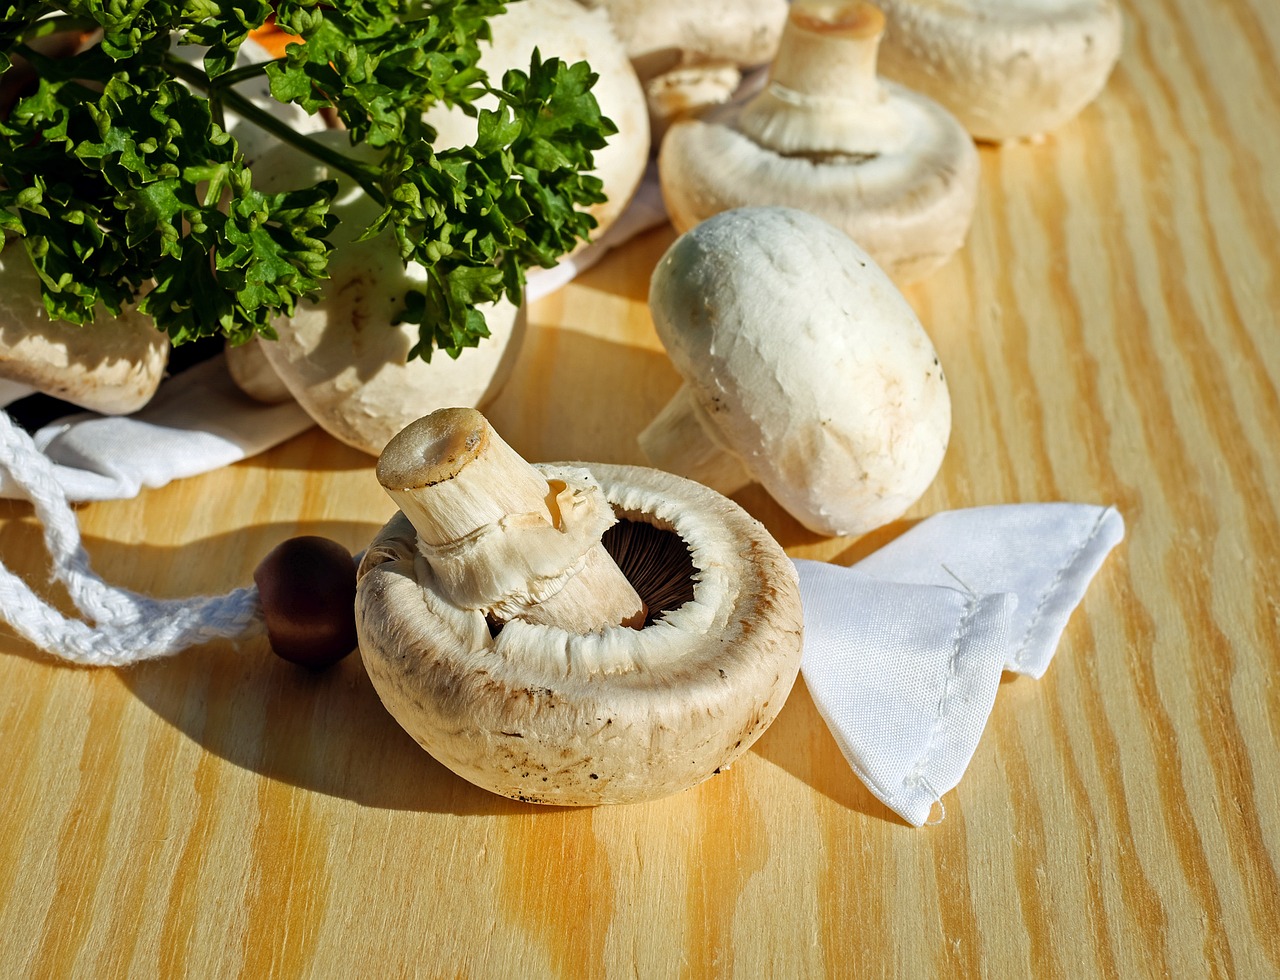 How Much Mushroom Can I Eat A Day? (How To Enjoy Mushrooms Daily)